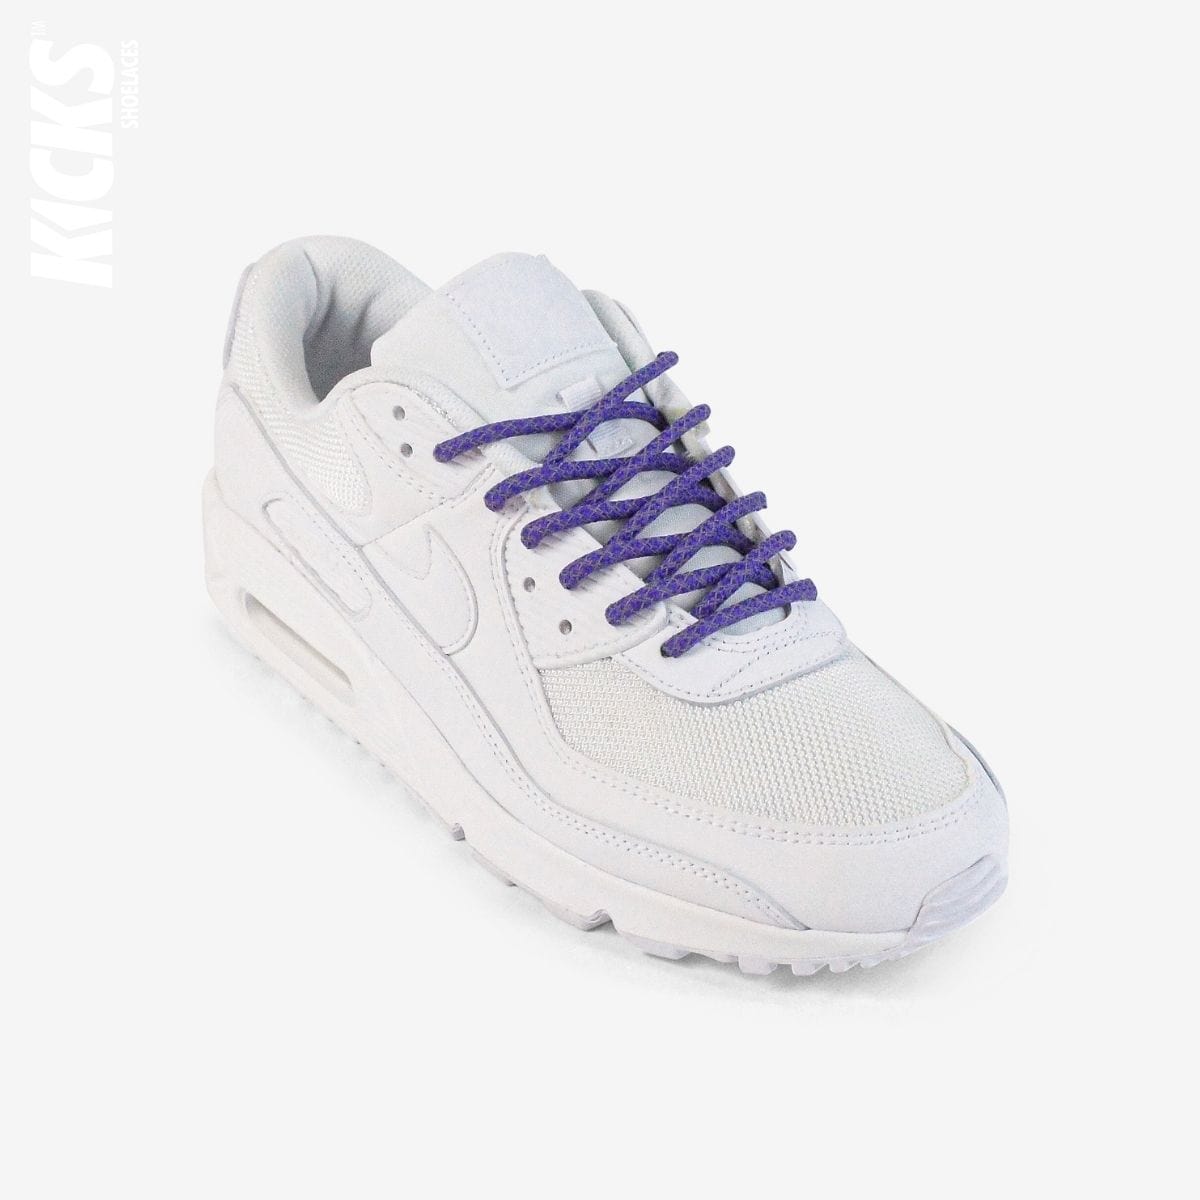 rope-laces-on-white-sneakers-with-kids-purple-shoelaces